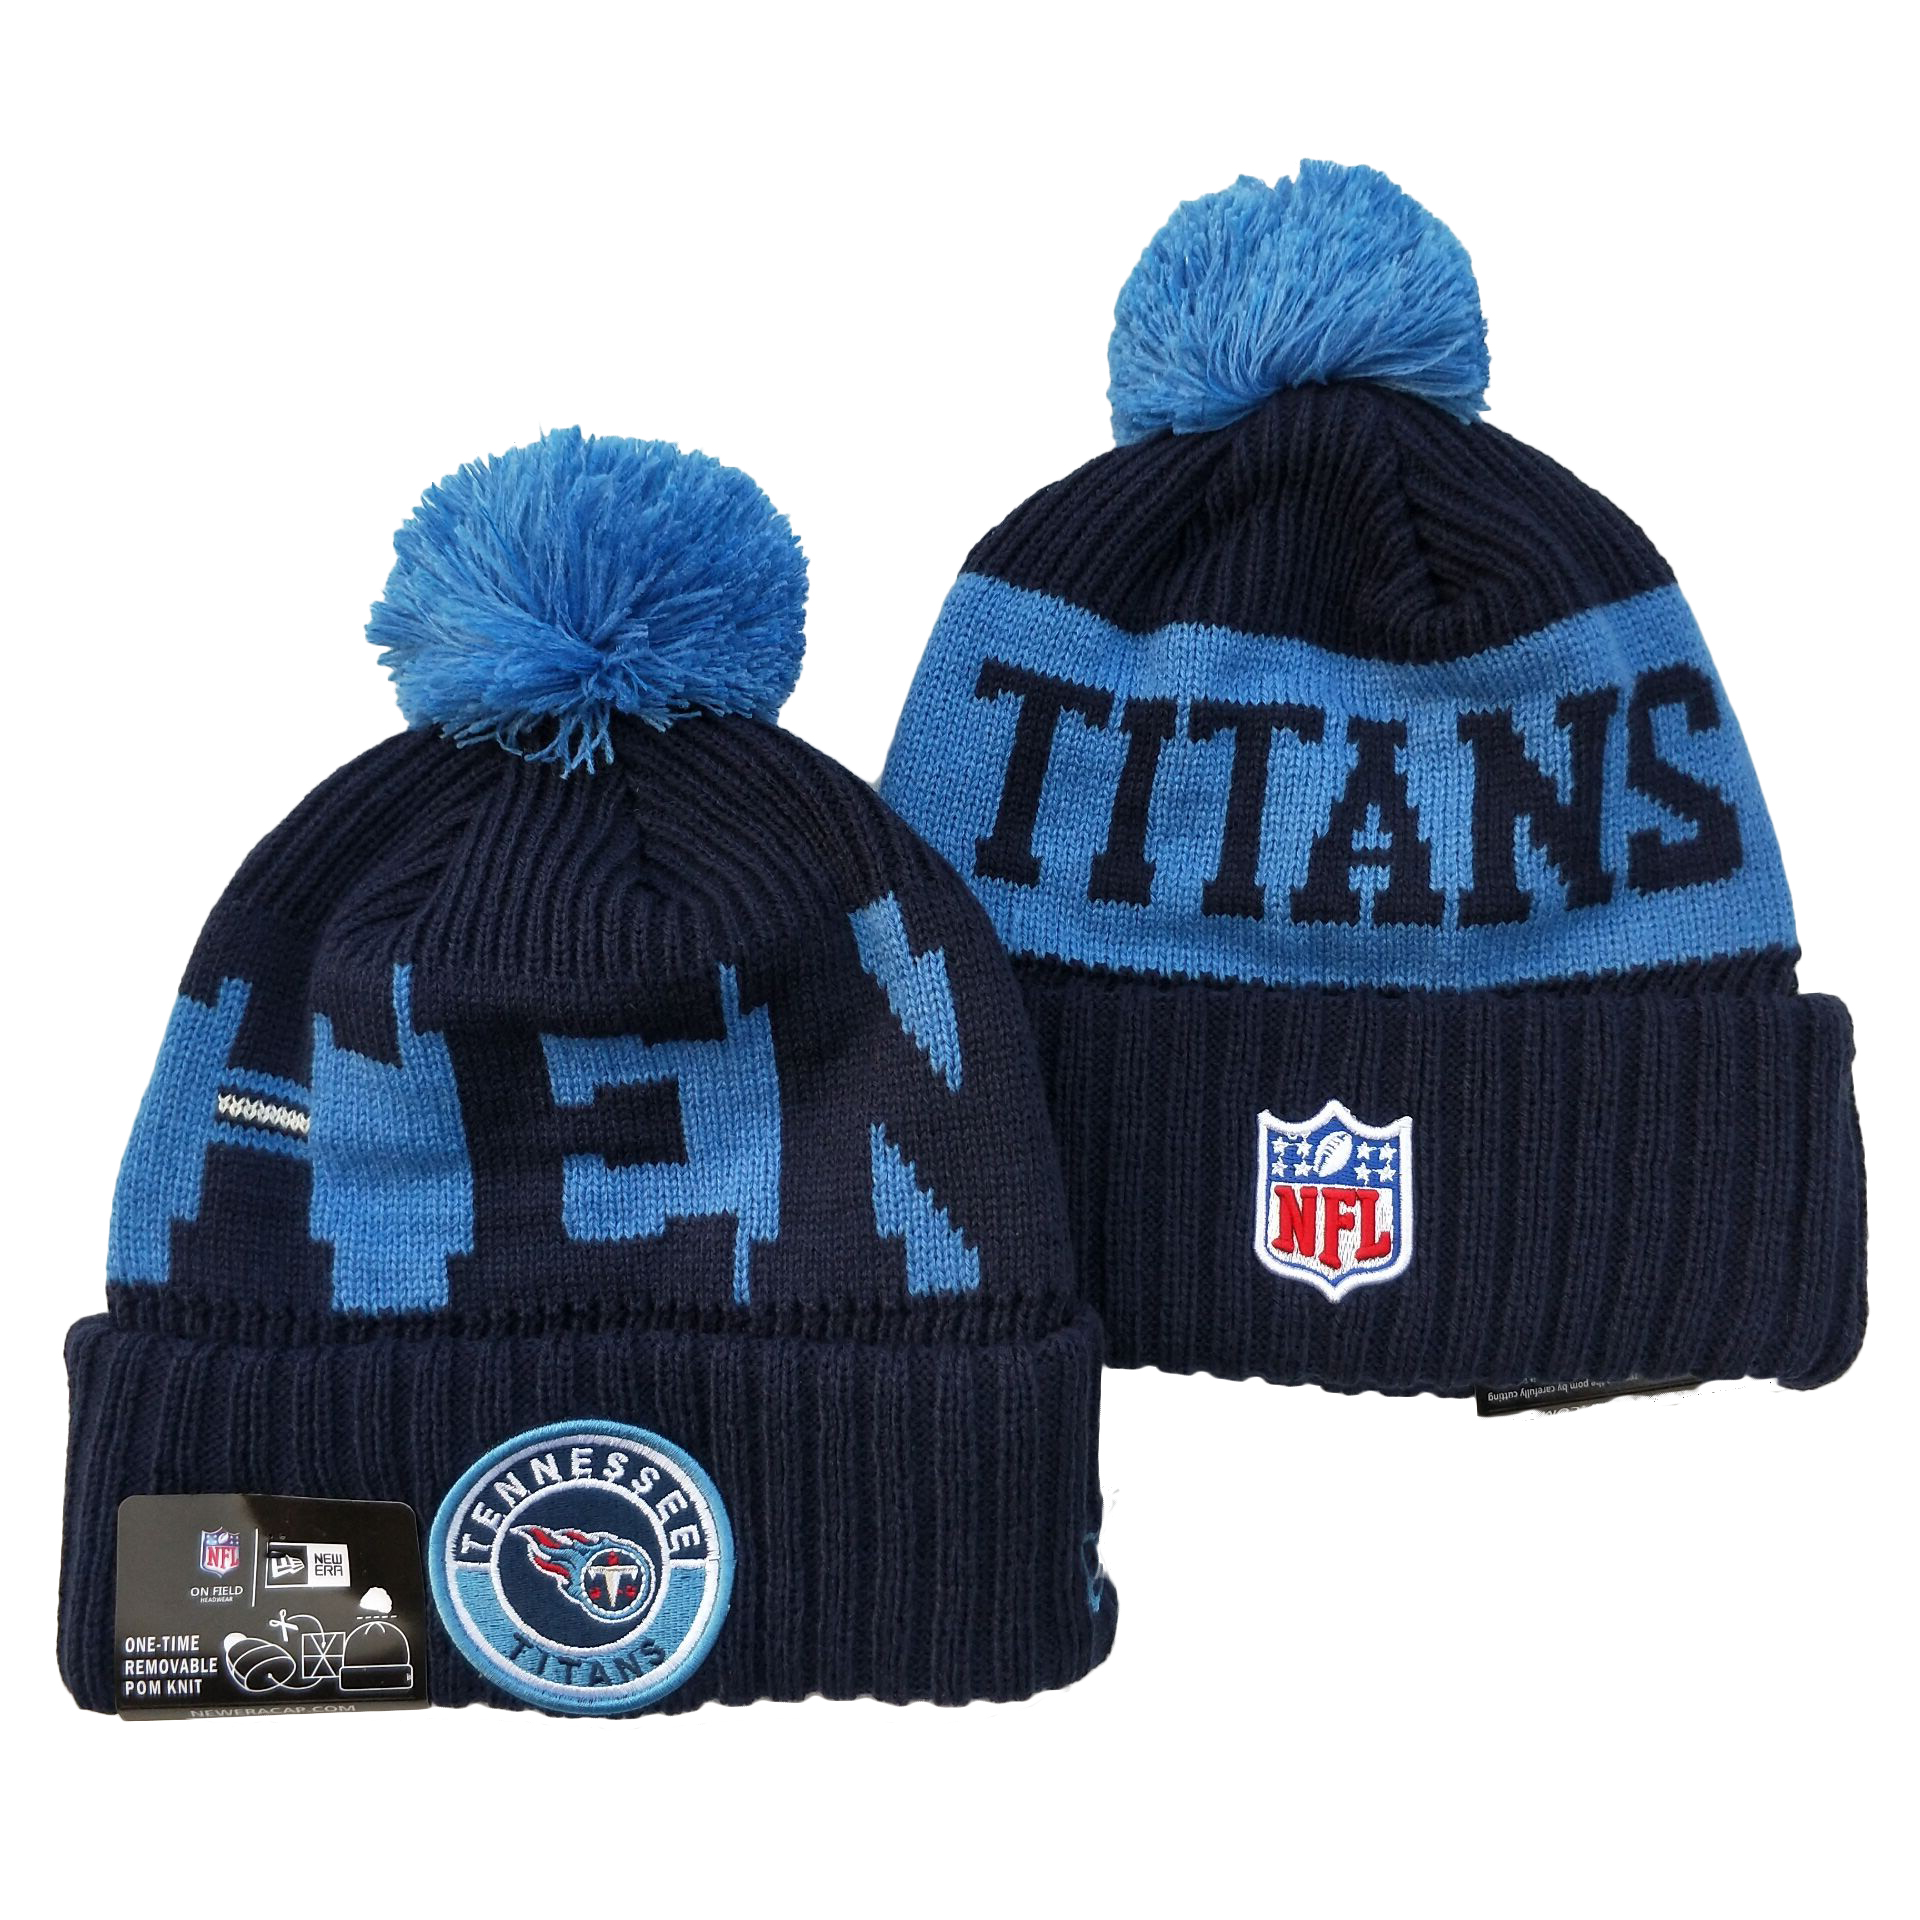 Tennessee Titans Knit Hats 034